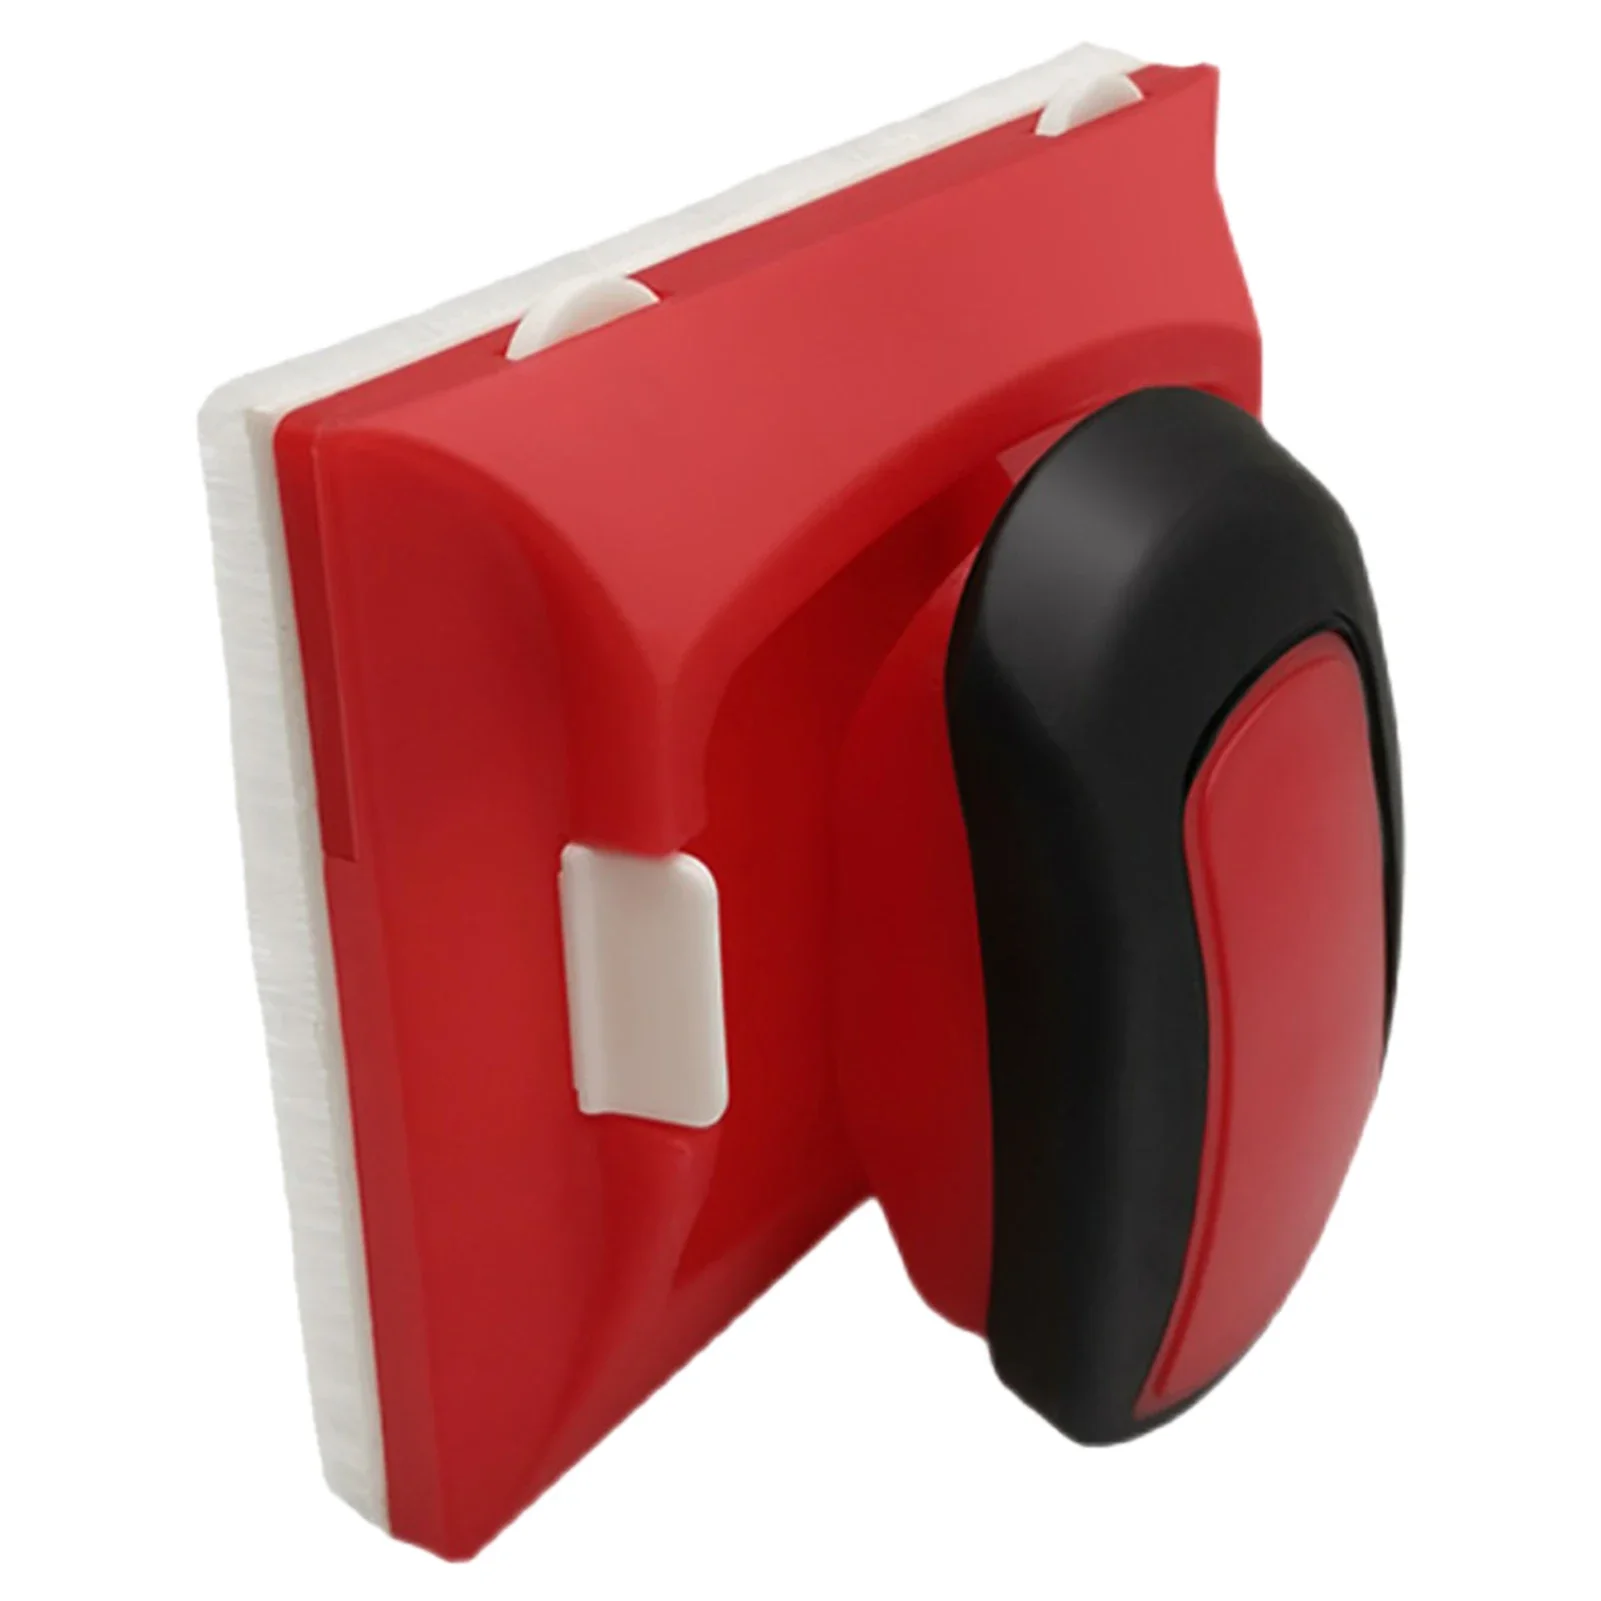 Red Paint Edger Cutting In Home Interior Plastic Wall With Pad Nylon Bristles Edges Painting Corner and Edges